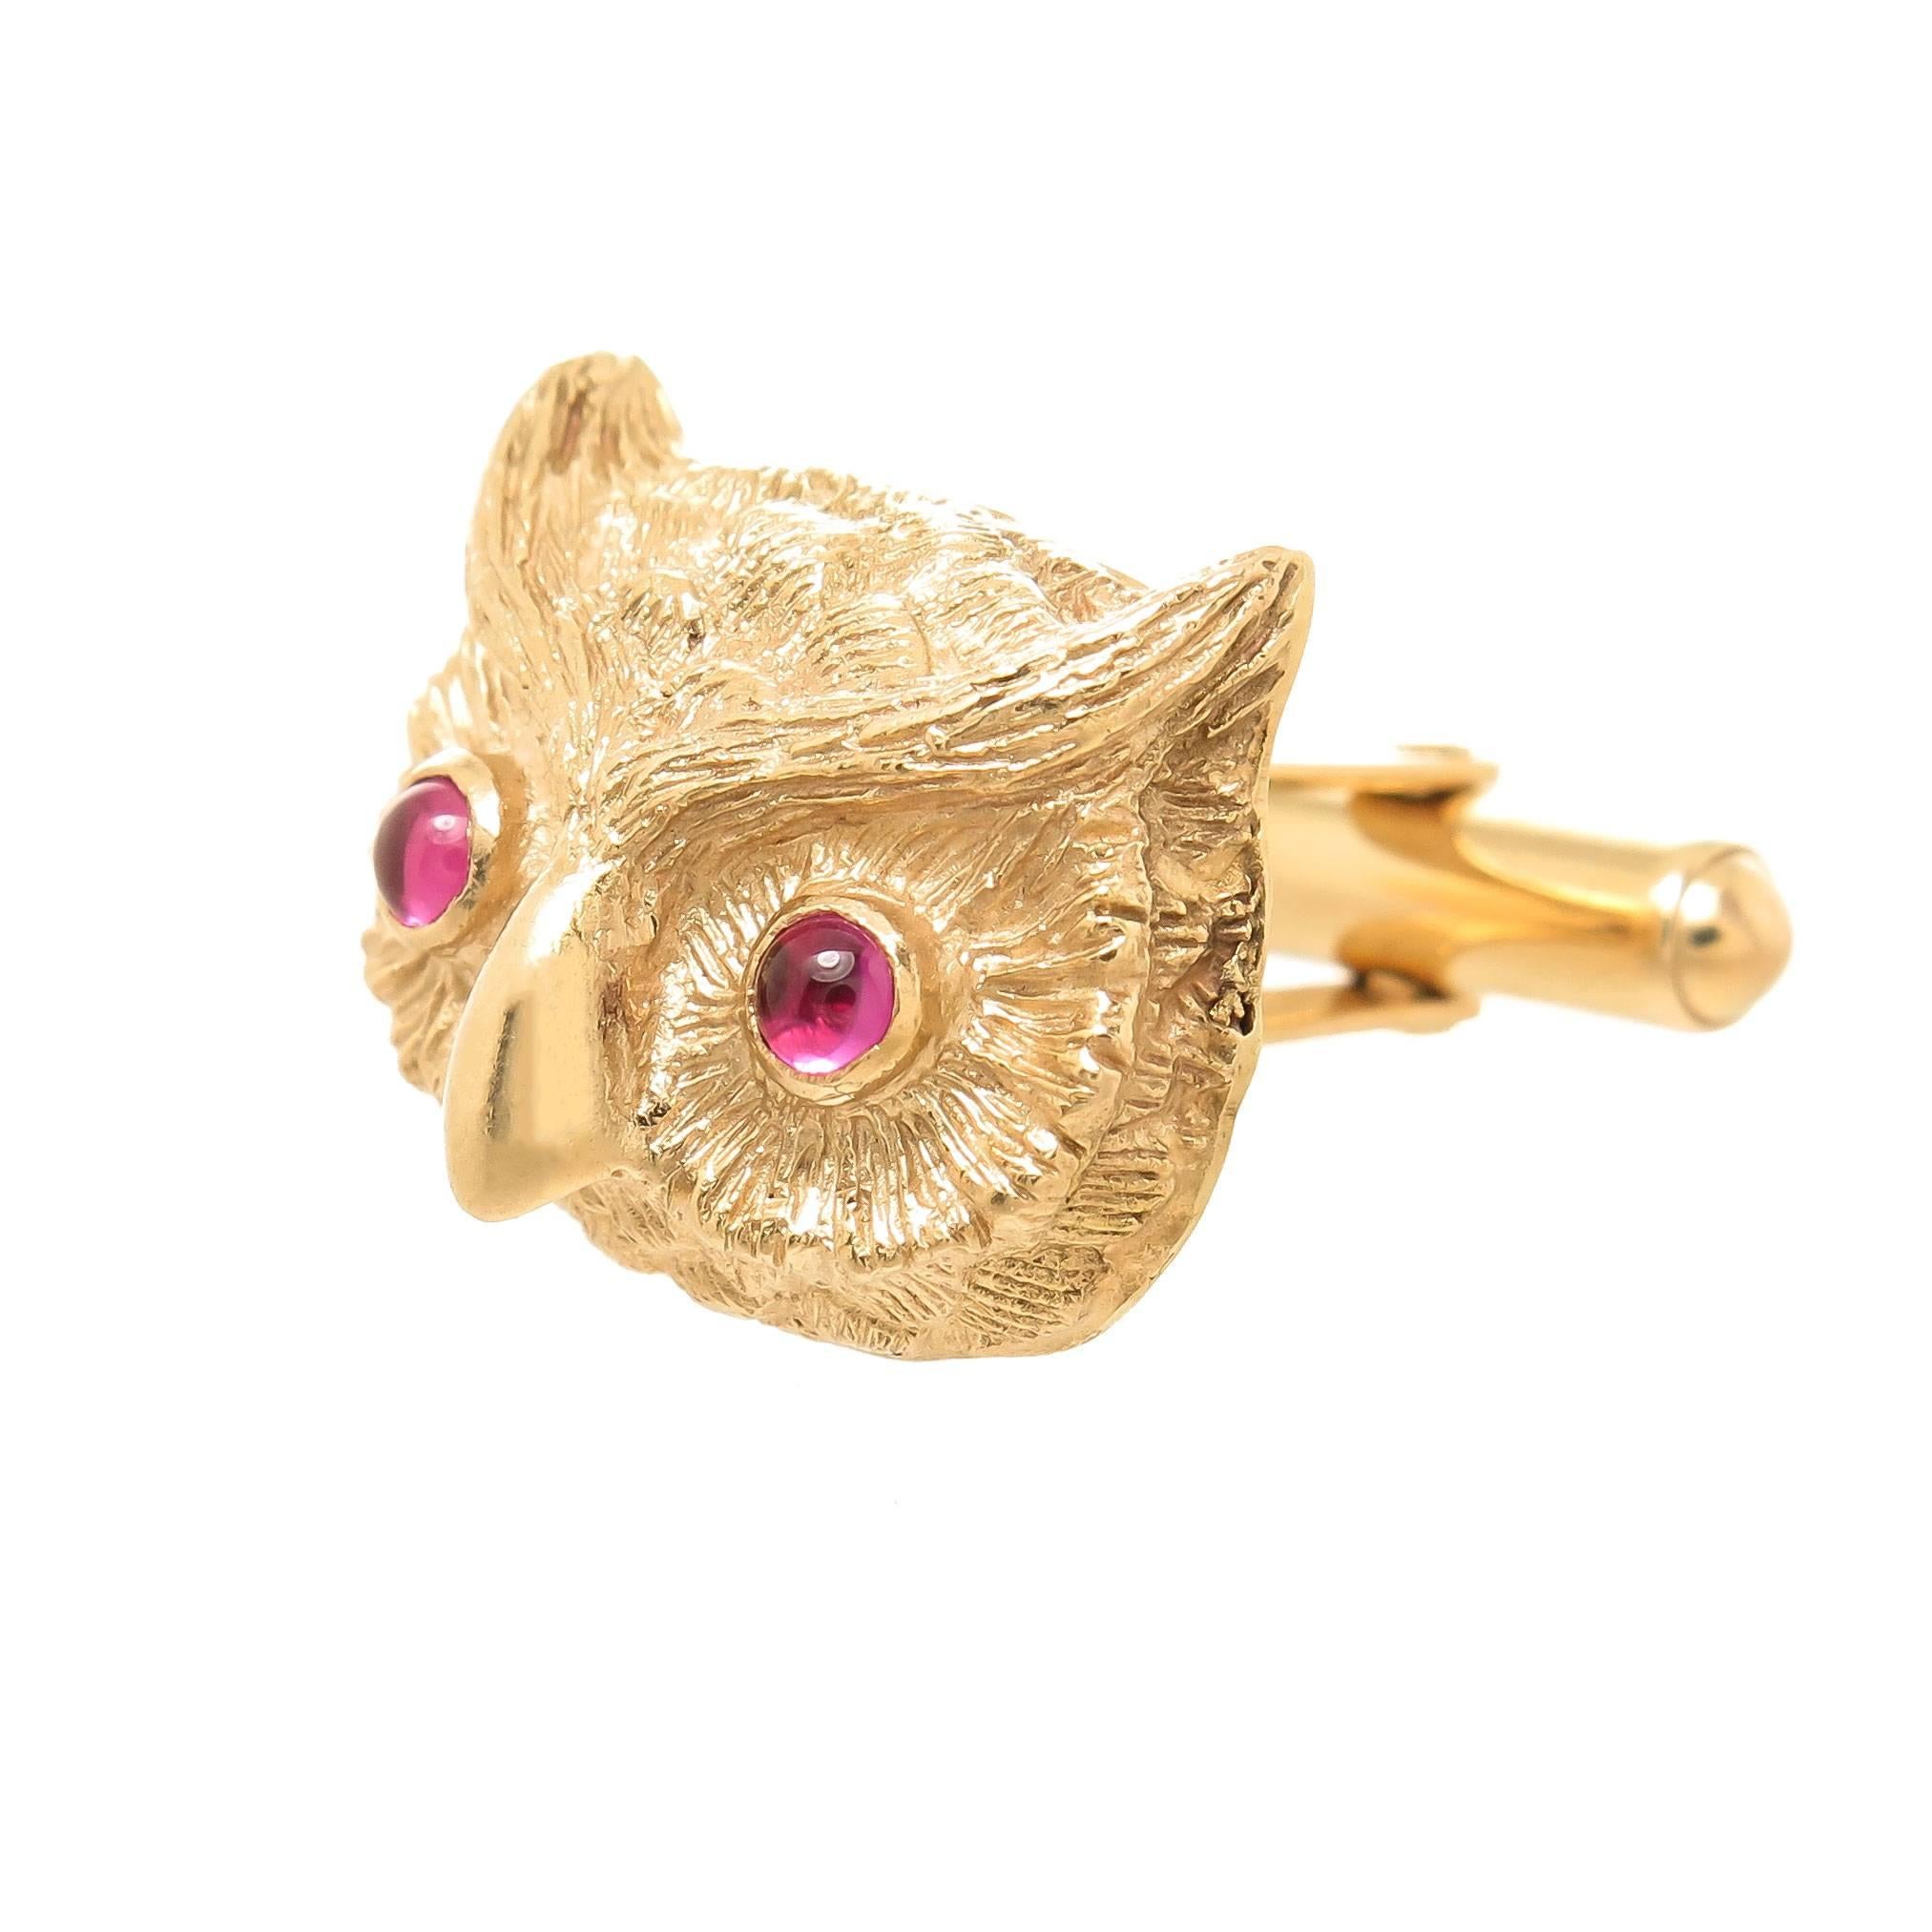 Circa 1970s 14K yellow Gold Owl head Cufflinks. The top measuring 3/4 X 5/8 inch and weighing 17 Grams. Nicely Detailed and having Cabochon Synthetic Ruby eyes. 